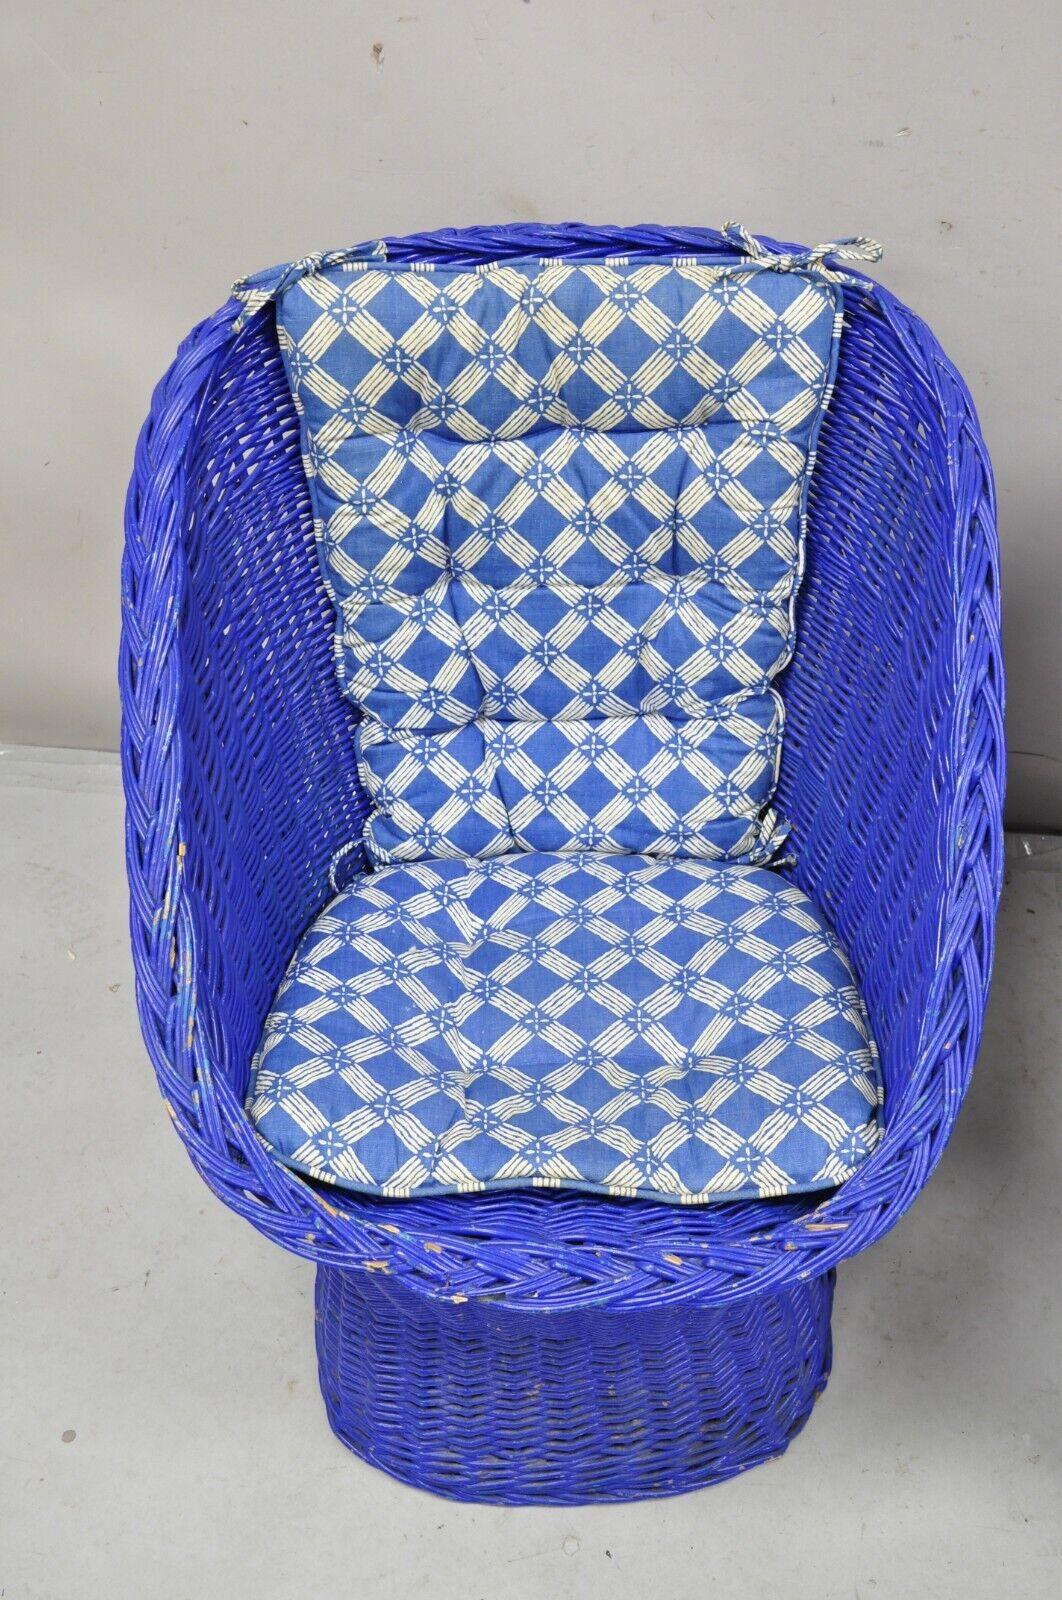 Vintage Mid Century Modern Blue Painted Wicker Rattan Pod Club Chairs - a Pair For Sale 7